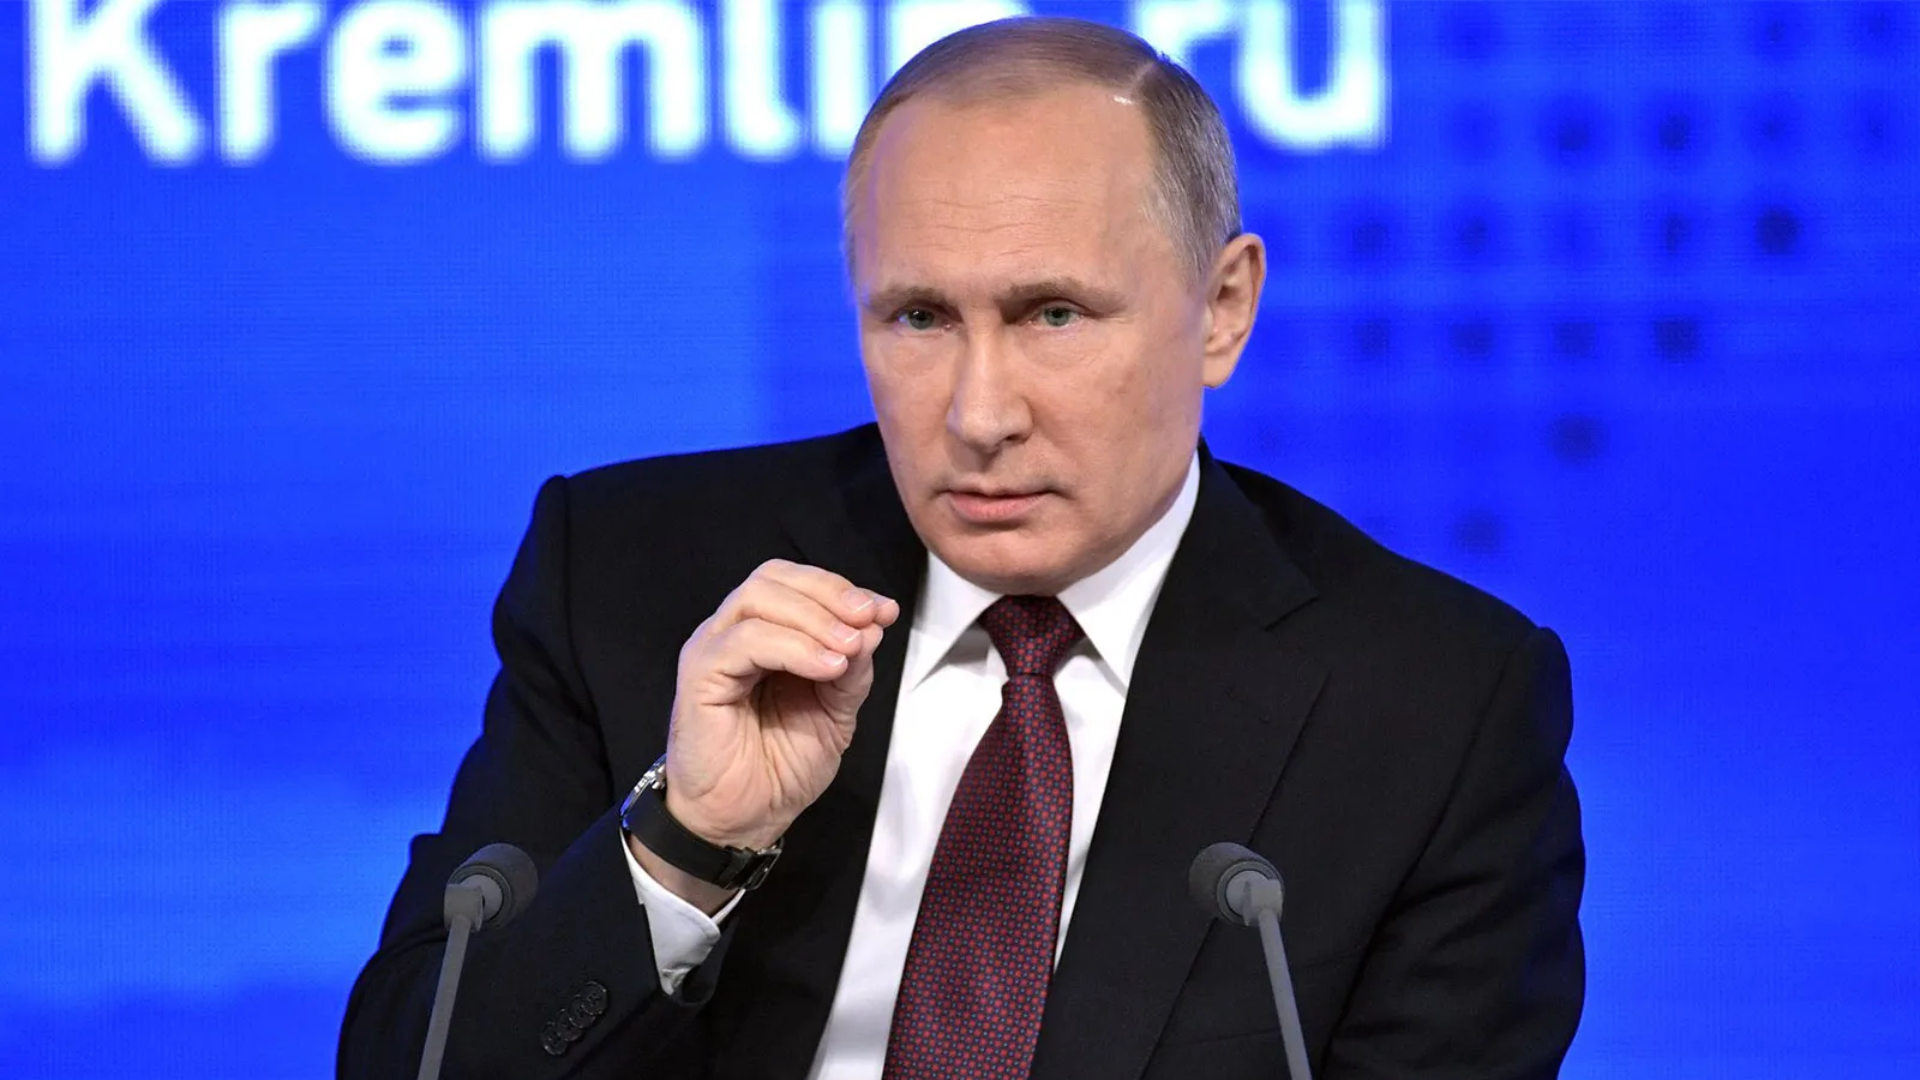 Putin Authorizes Decree Allowing Confiscation Of U.S. Property